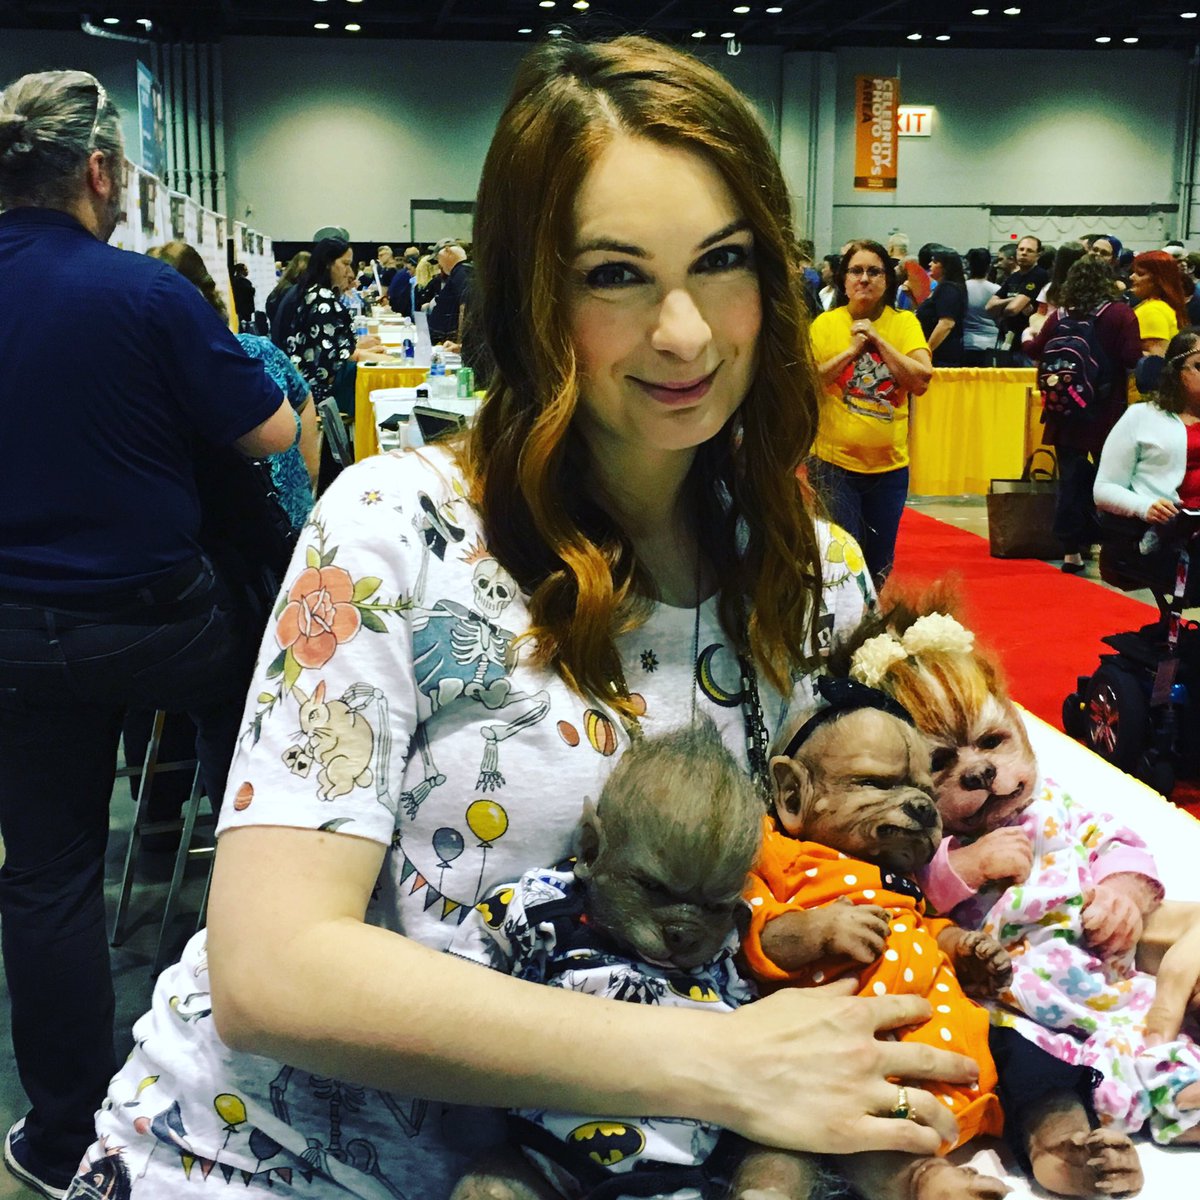 What's up? Oh nothing, just posing with three werewolf babies. #MegaCon2017 https://t.co/EKgLrkl9c1